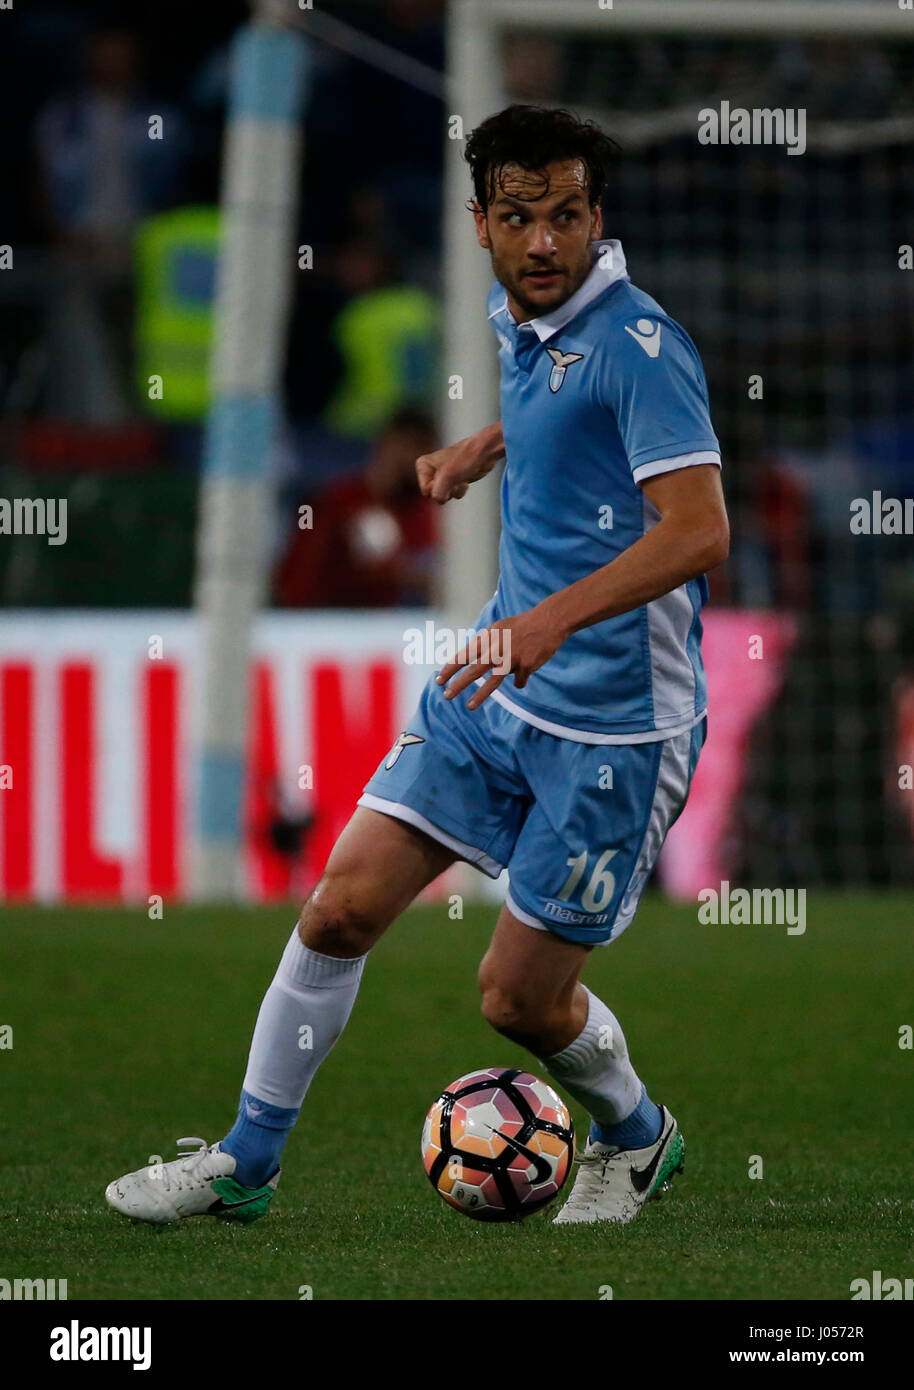 Rome, Italy. 9th April, 2017. Marco Parolo during the italian serie a soccer match, between SS Lazio and SSC Napoli at the Olympic stadium in Rome Italy, April 09, 2017 Credit: agnfoto/Alamy Live News Stock Photo